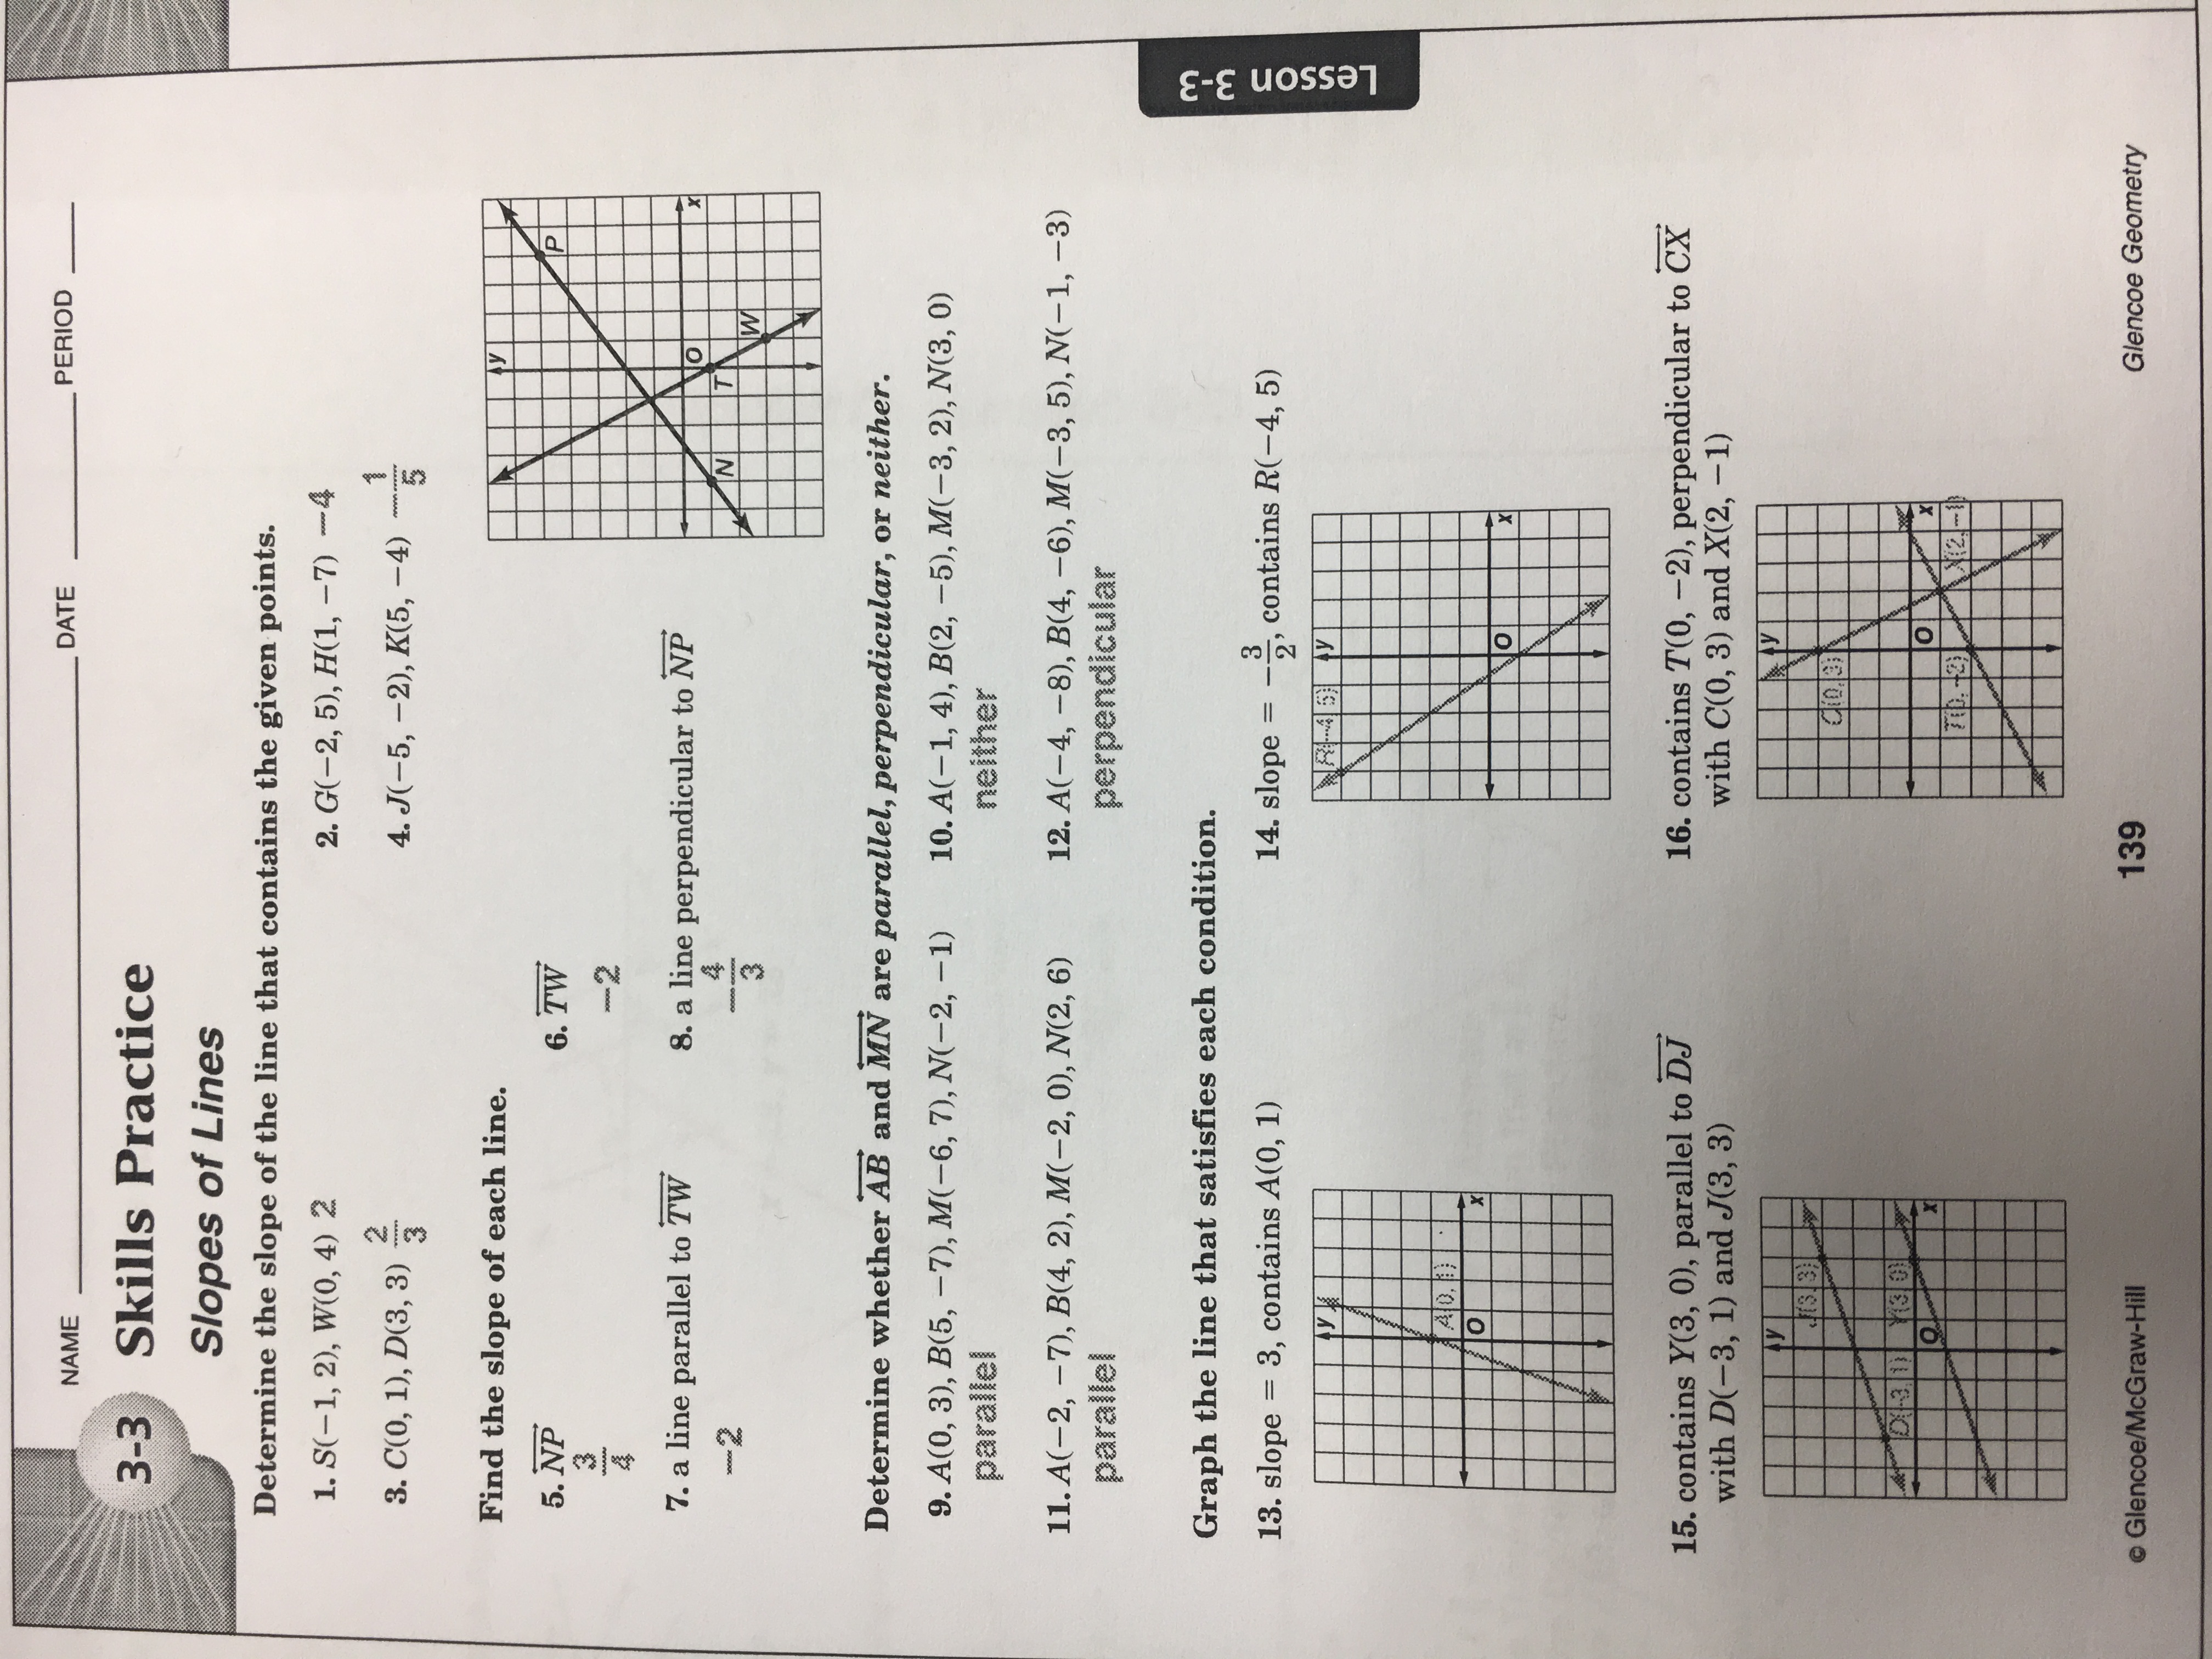 Geometry Quarter 1 Mr. Light's Weebly Page